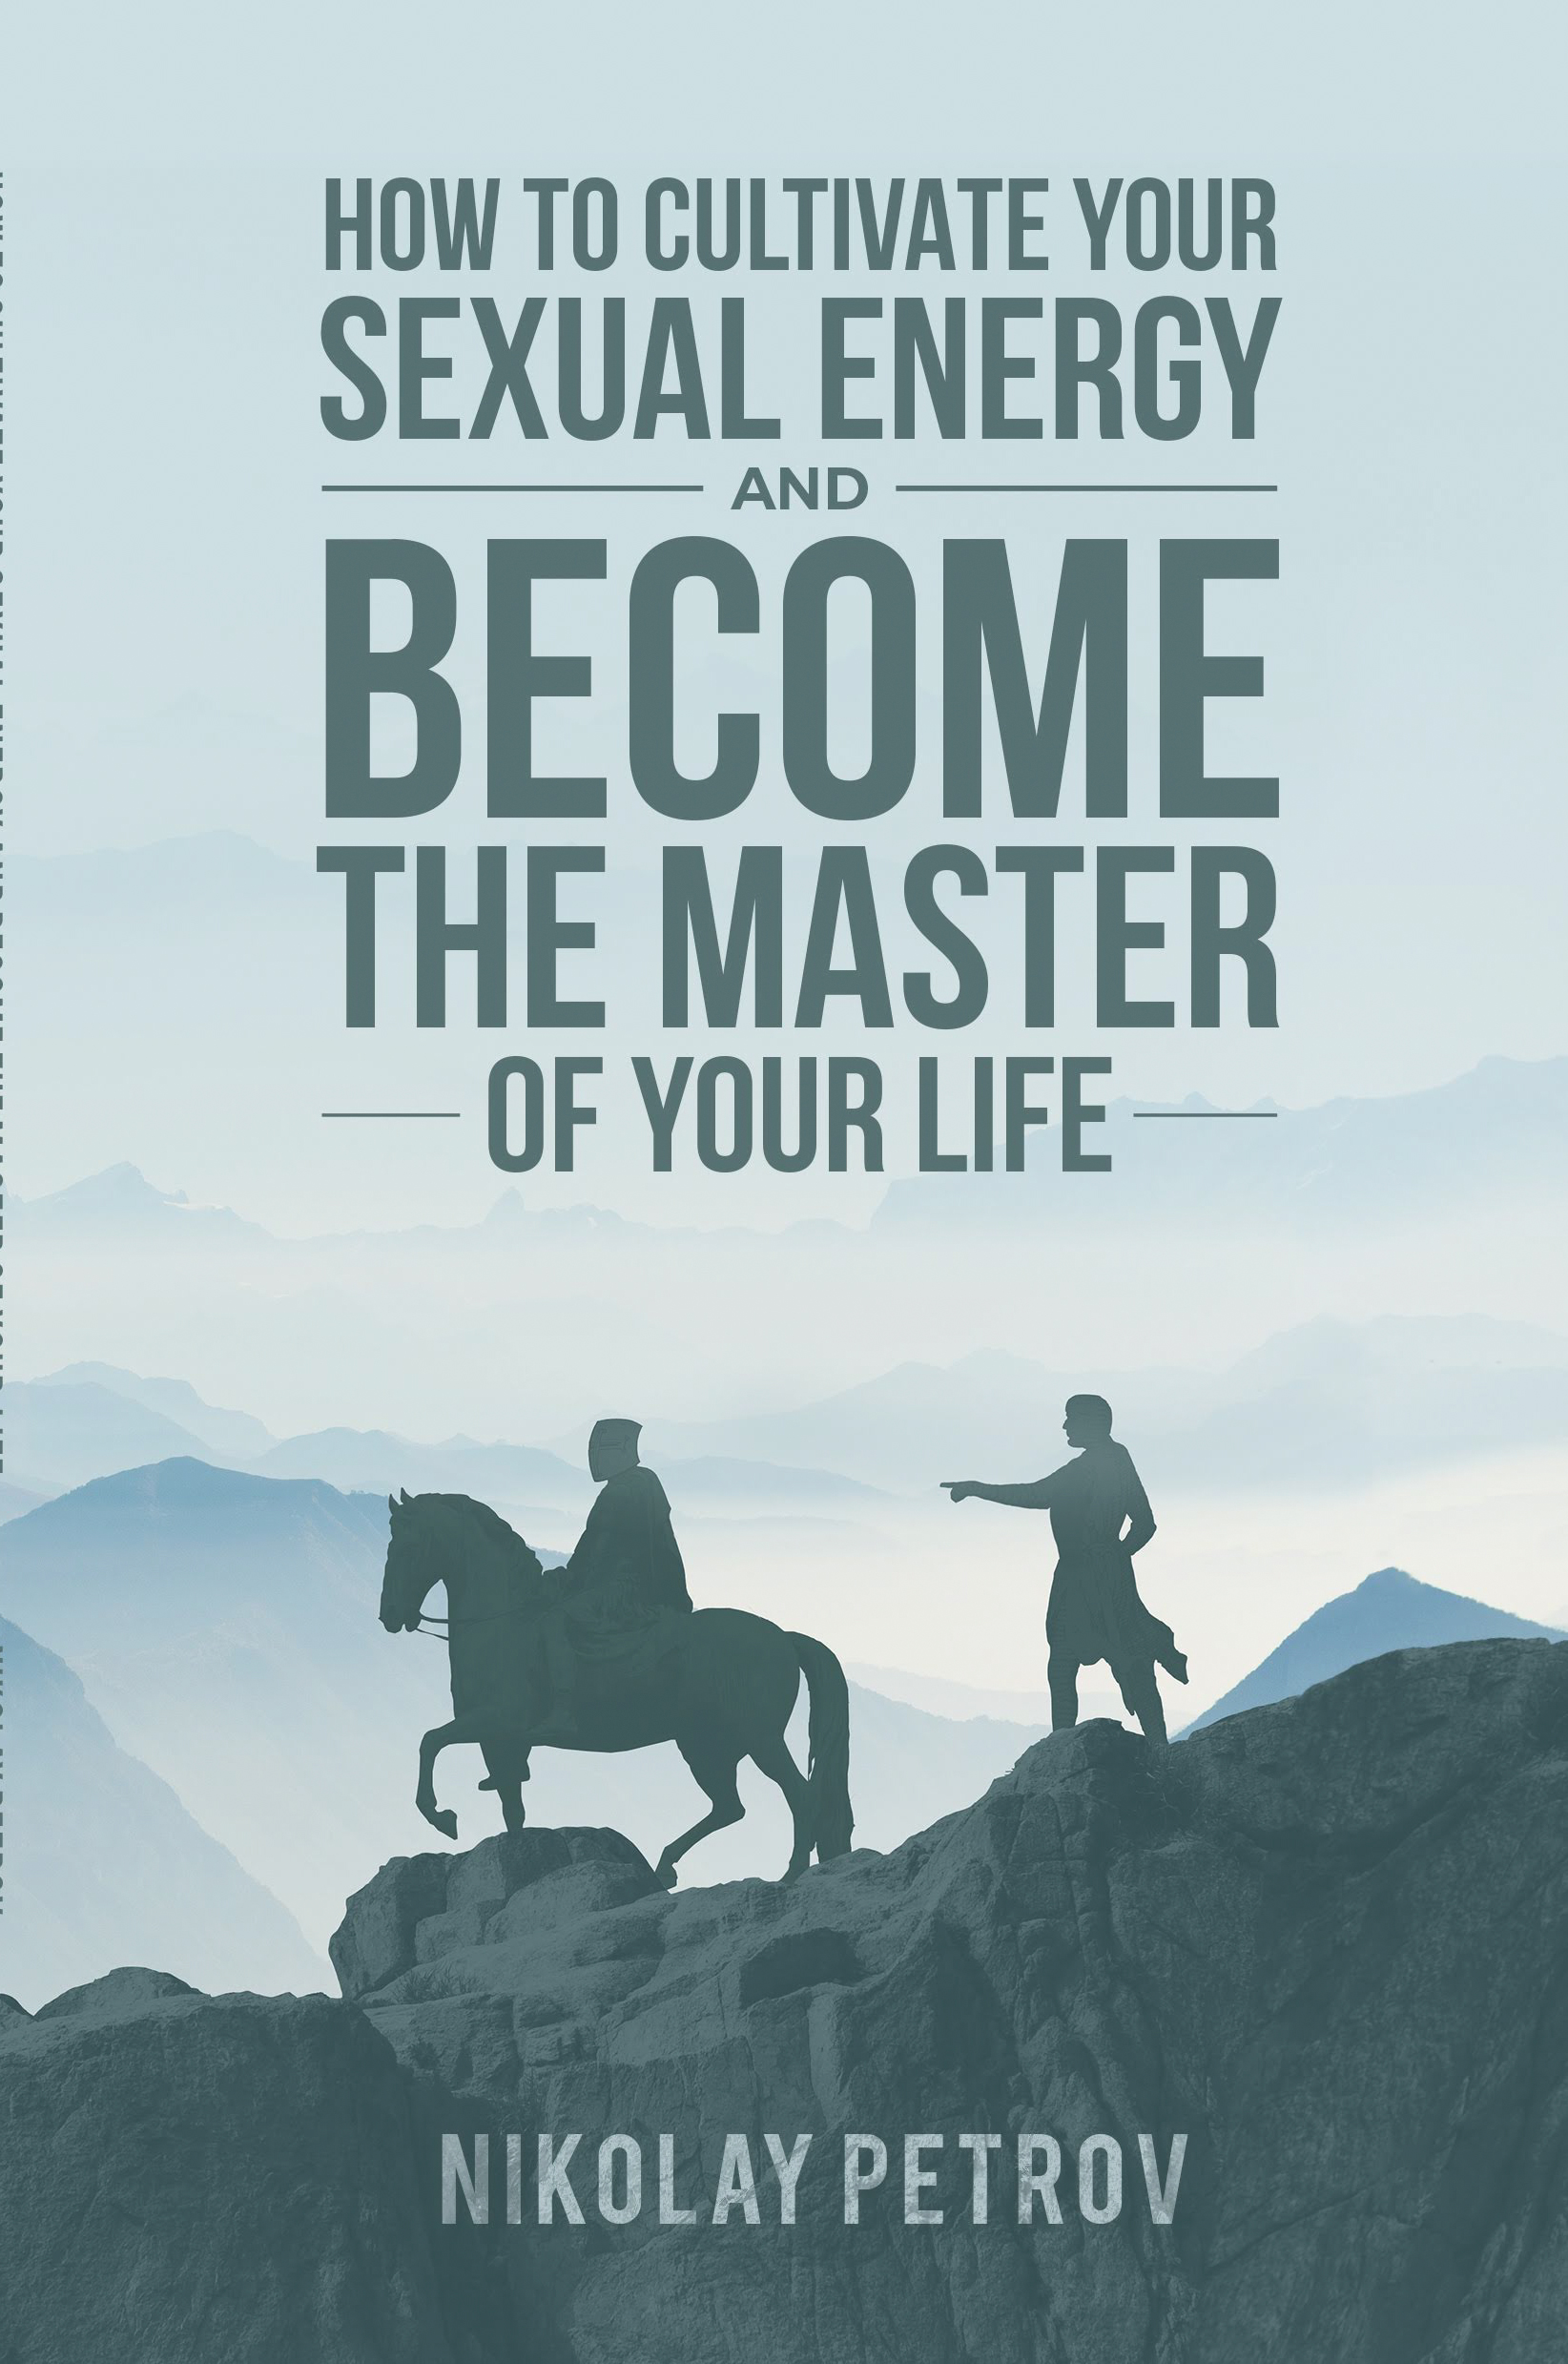 FREE: How to Cultivate Your Sexual Energy and Become The Master of Your Life: The only self-help book that you will ever need! by Nikolay Petrov